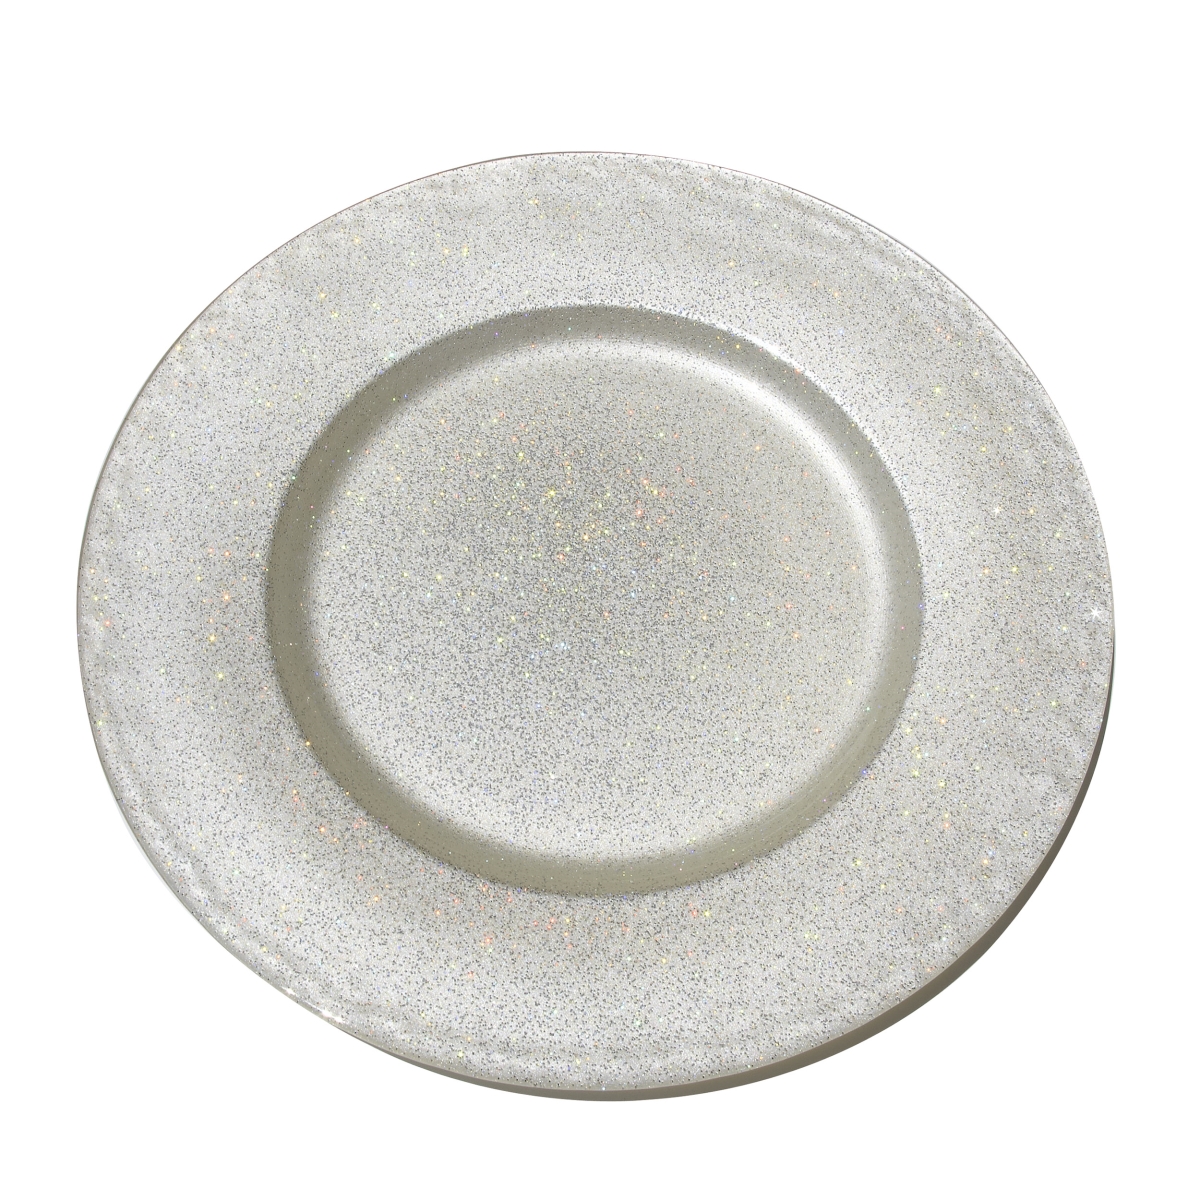 31133 13 In. Twinkle Glitter Charger Plate Set, White - Set Of 4